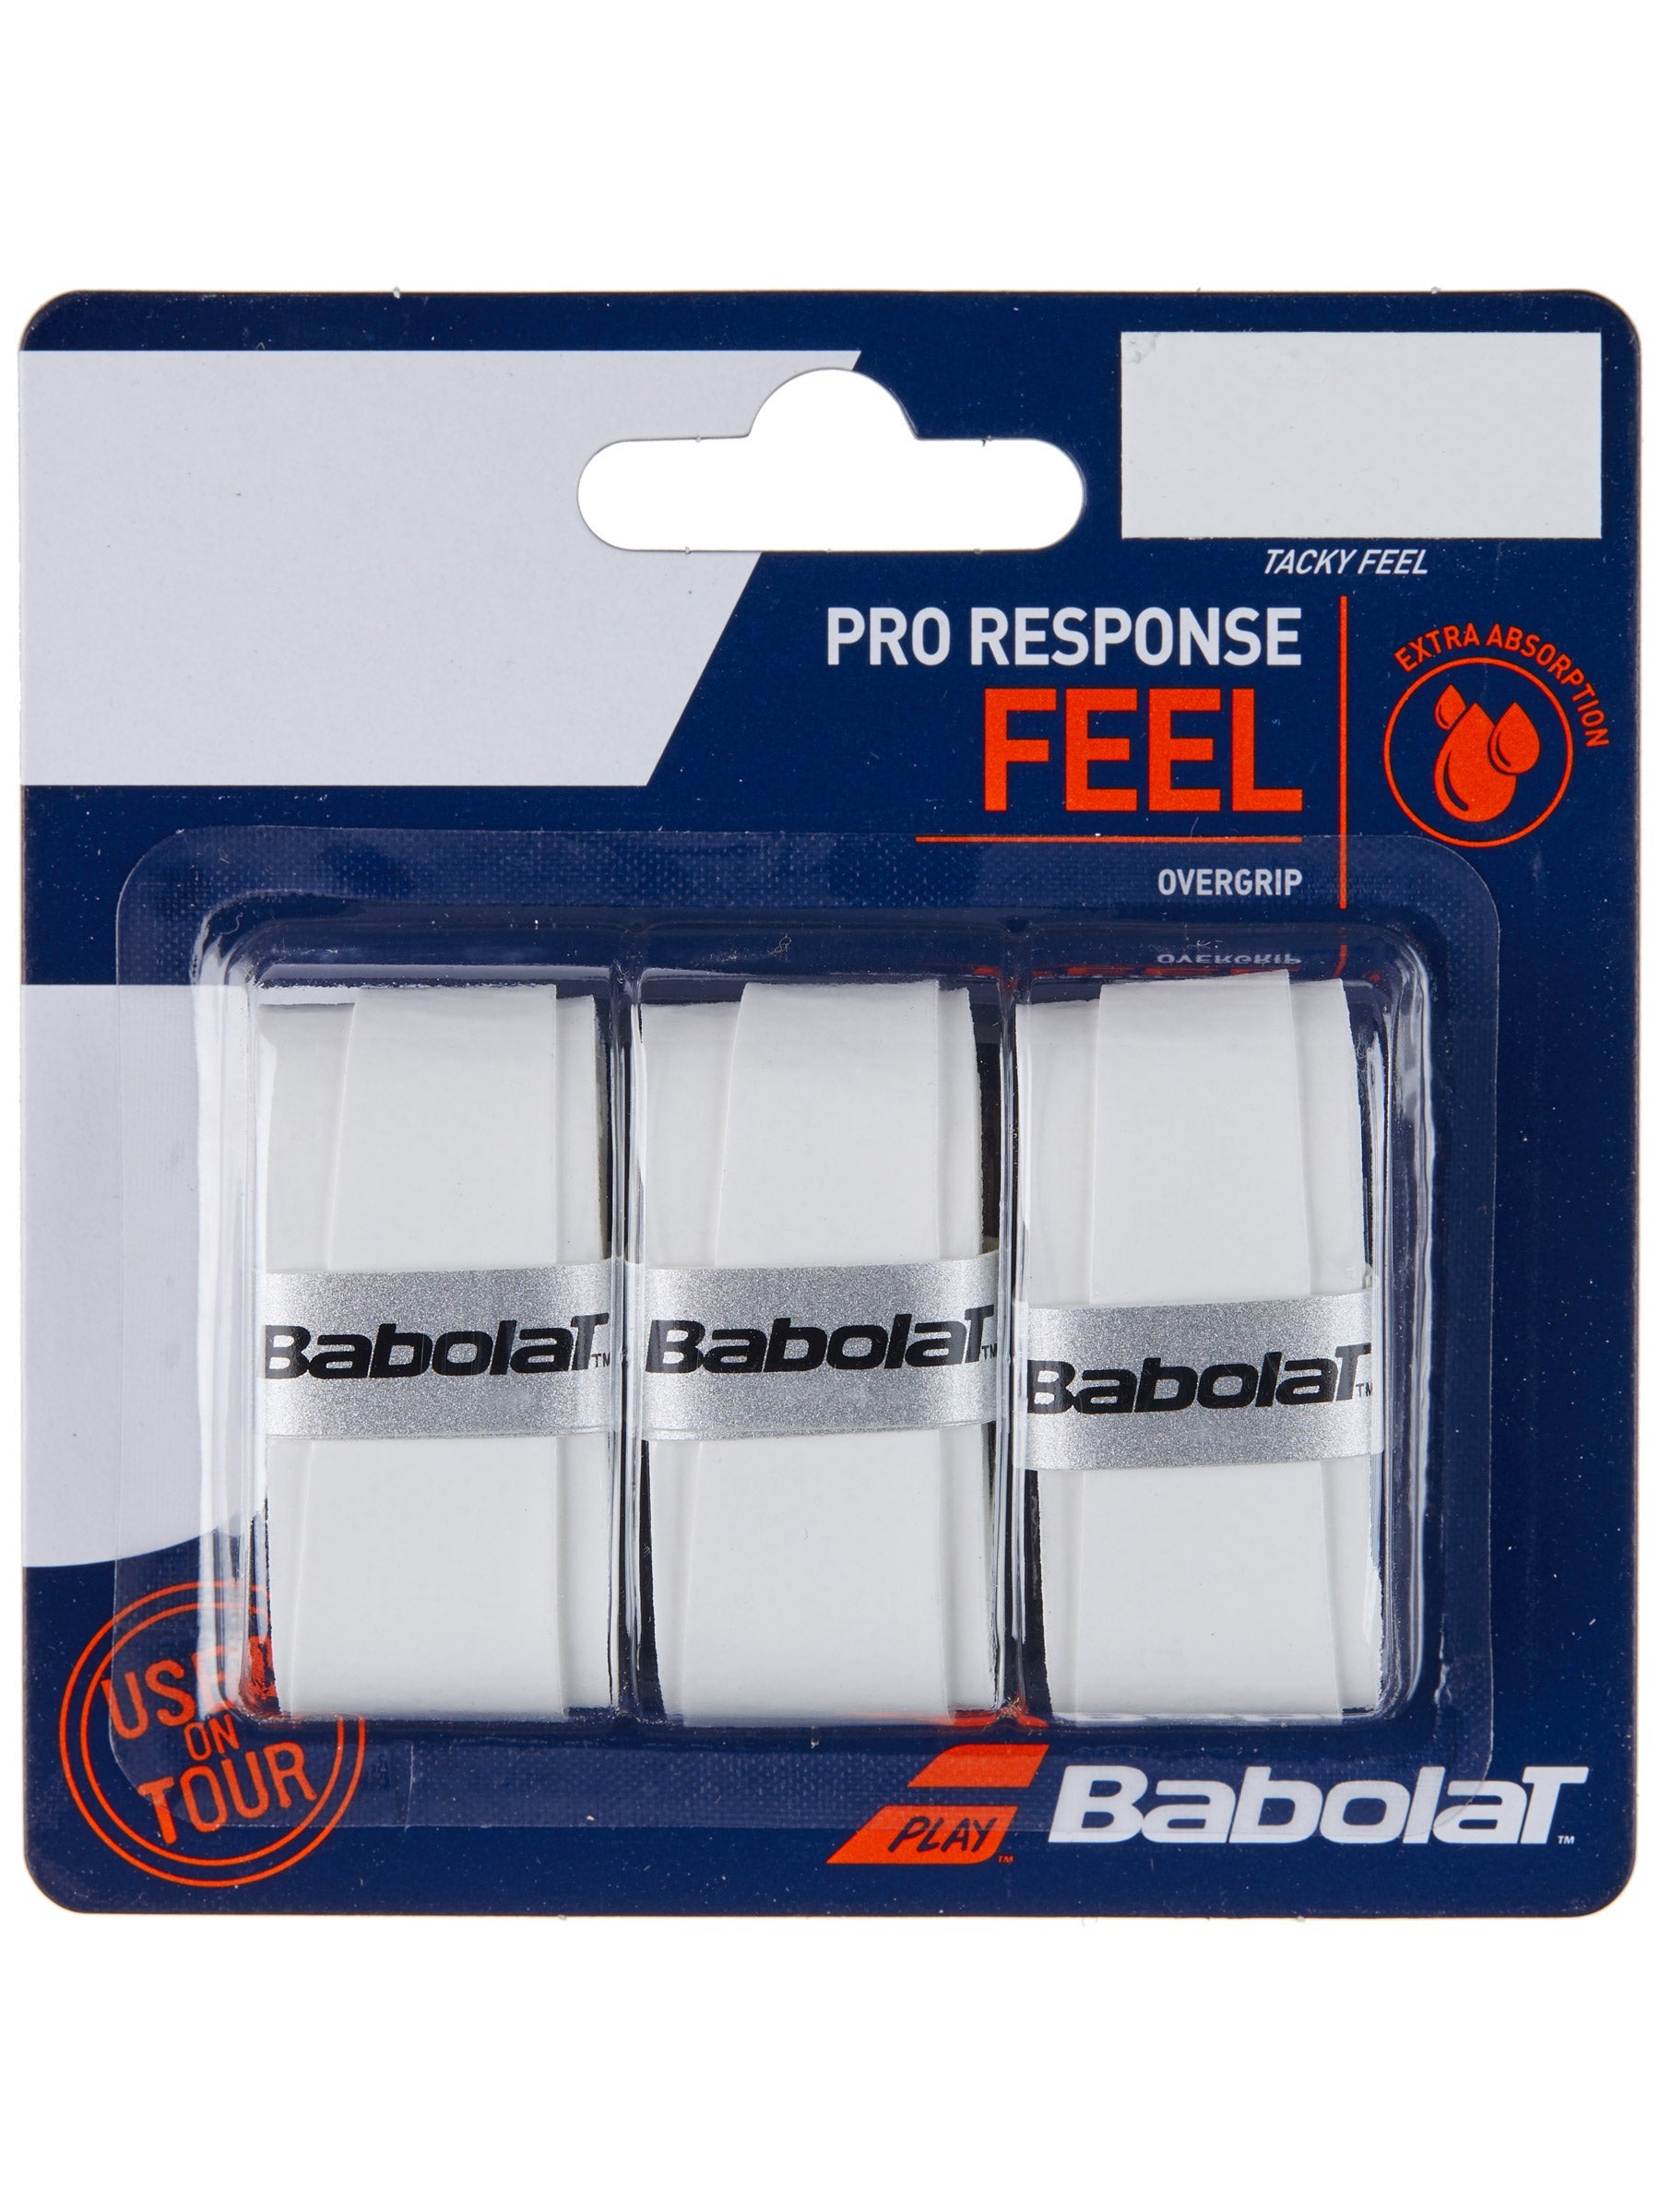 dpd 1 day uk delivery 1xBabolat Pro Tour White Overgrip Tennis grips 3 grips 